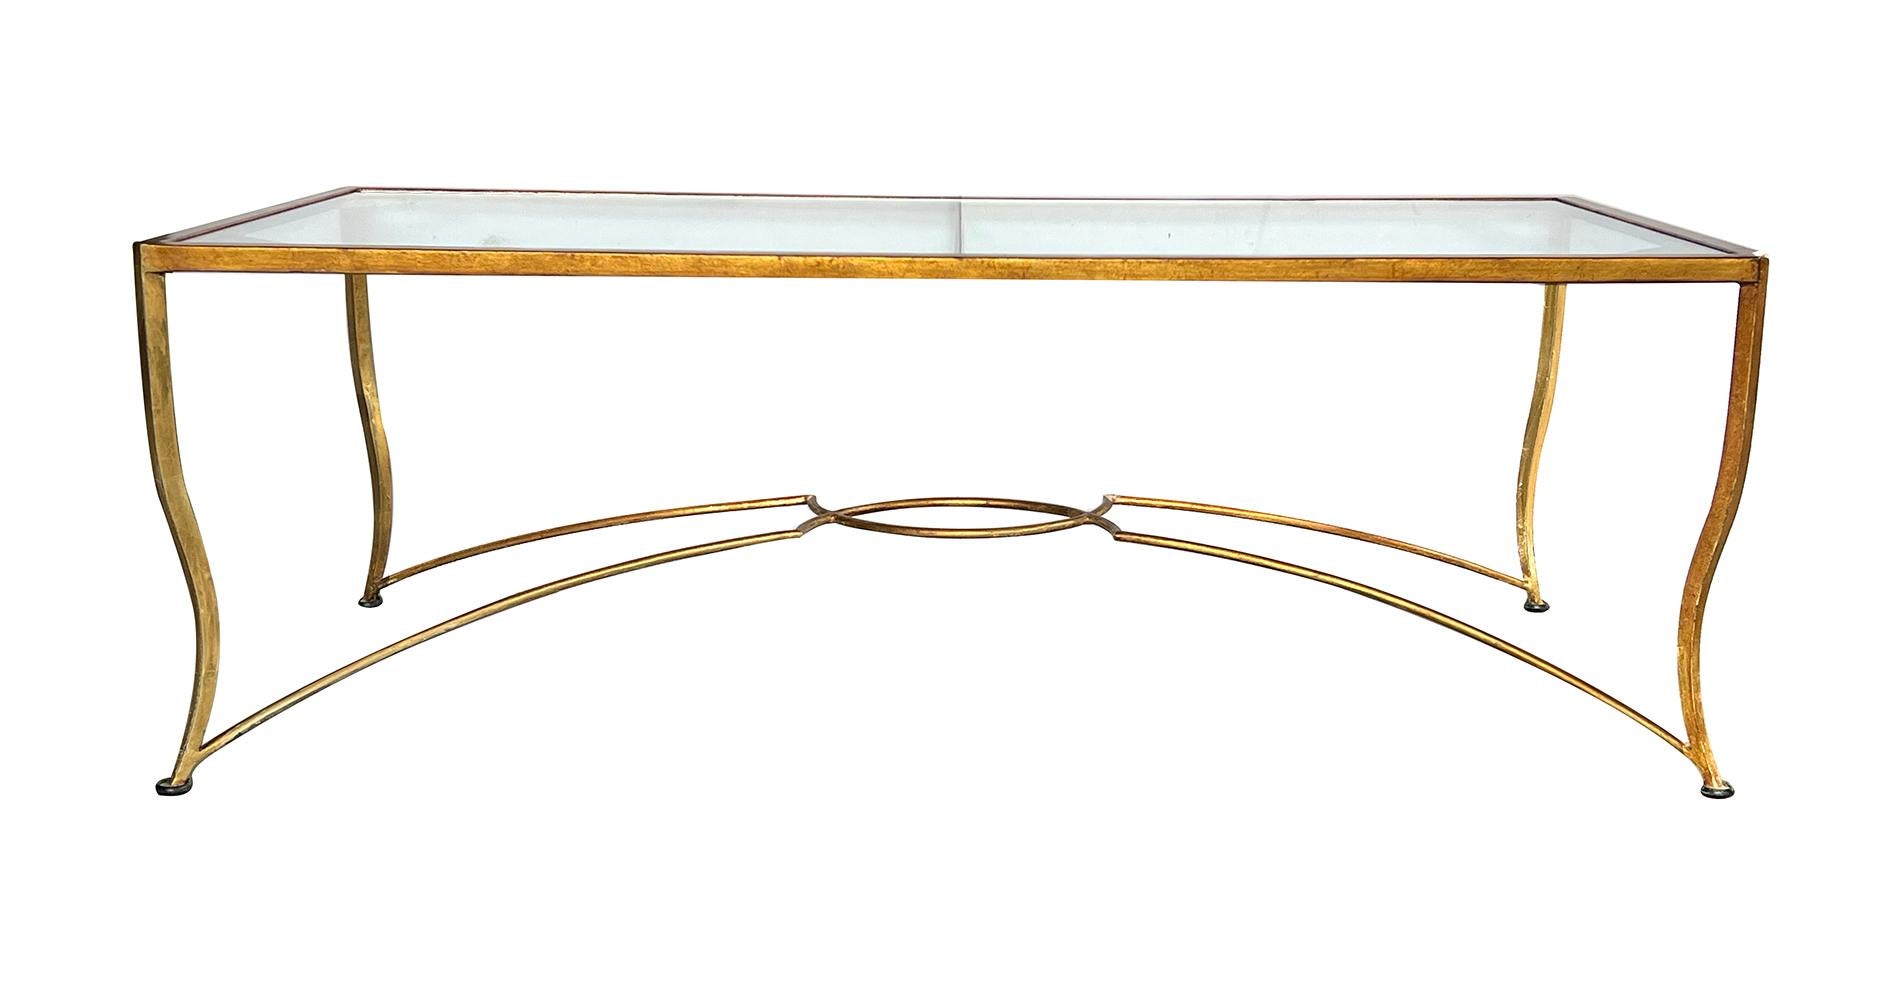 the rectangular inset glass top within a gilt-iron frame with canted corners all raised on graceful cabriole supports; joined by an arching and interlacing stretcher; new glass; overall rubbing and wear to gilding; good sturdy frame